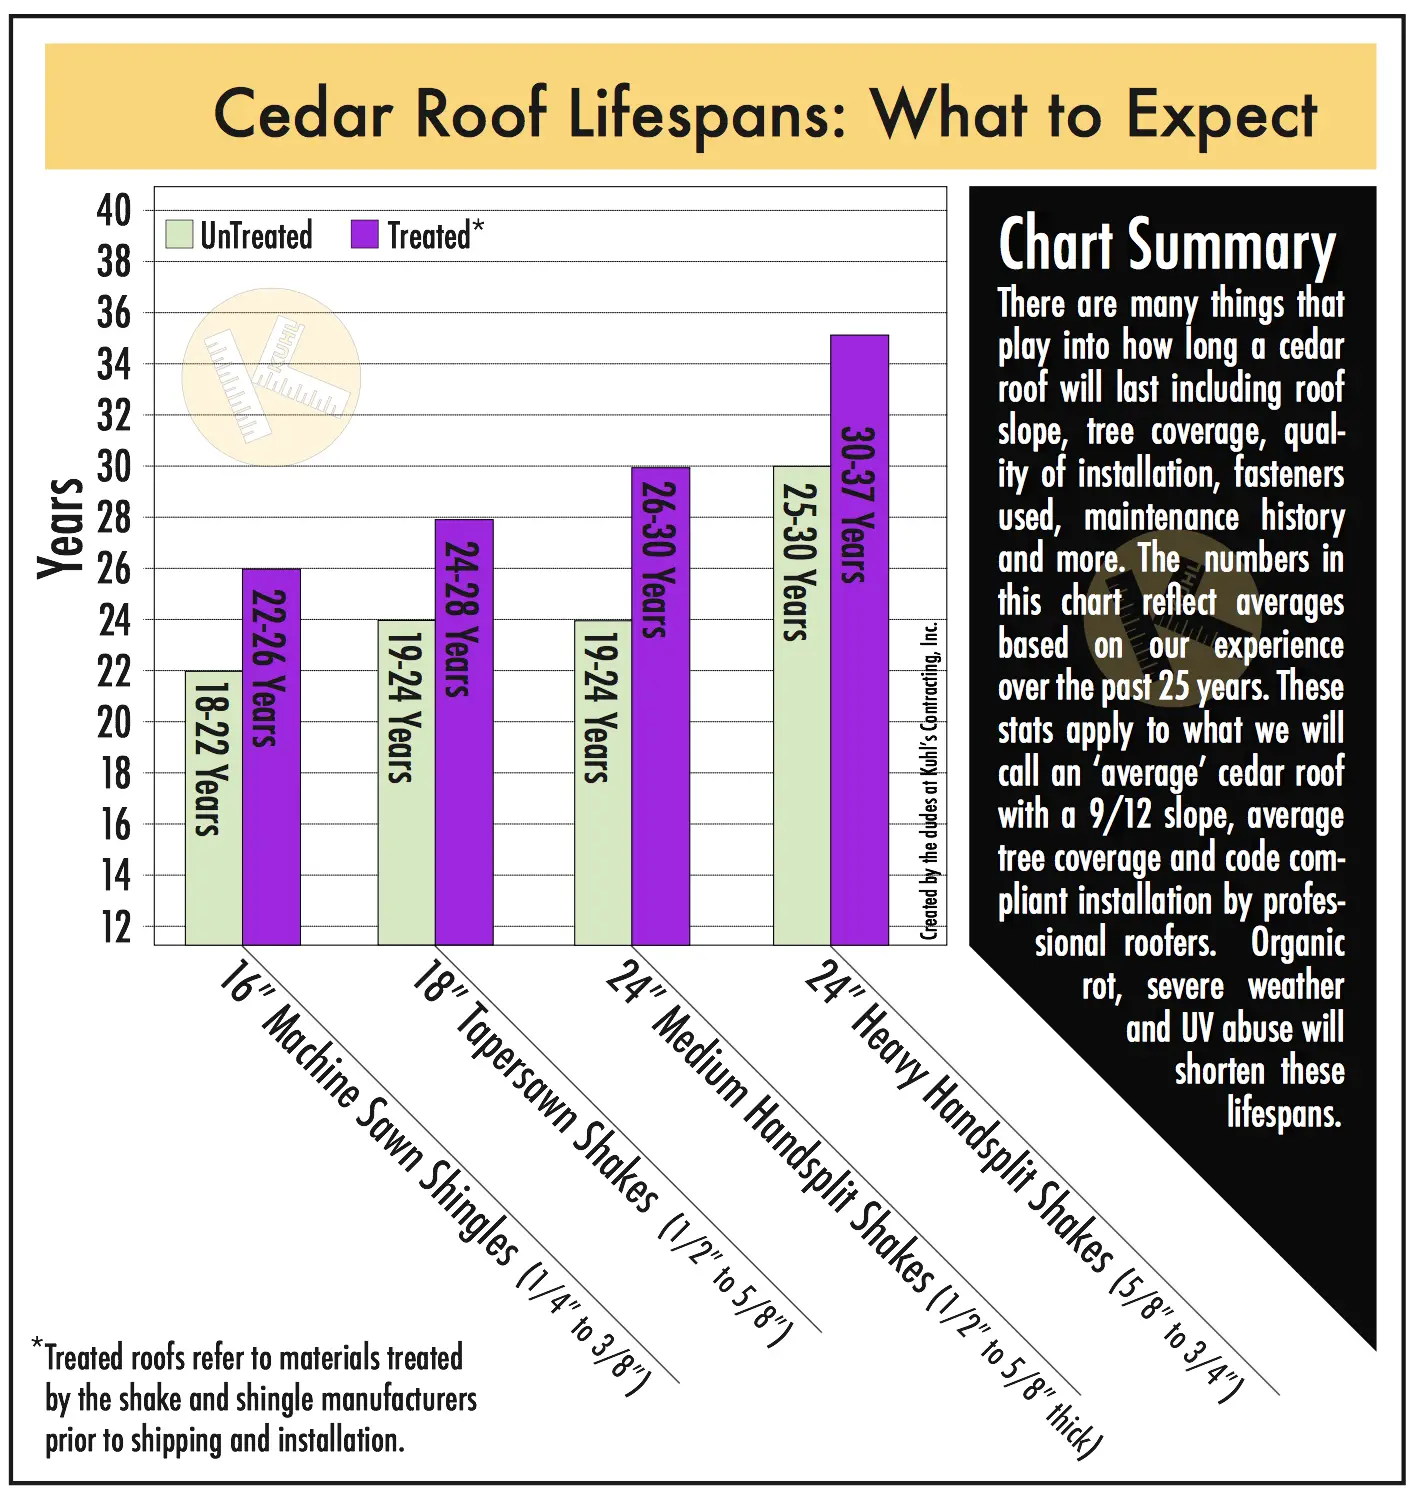 Life expectancy of cedar roofs in Minnesota